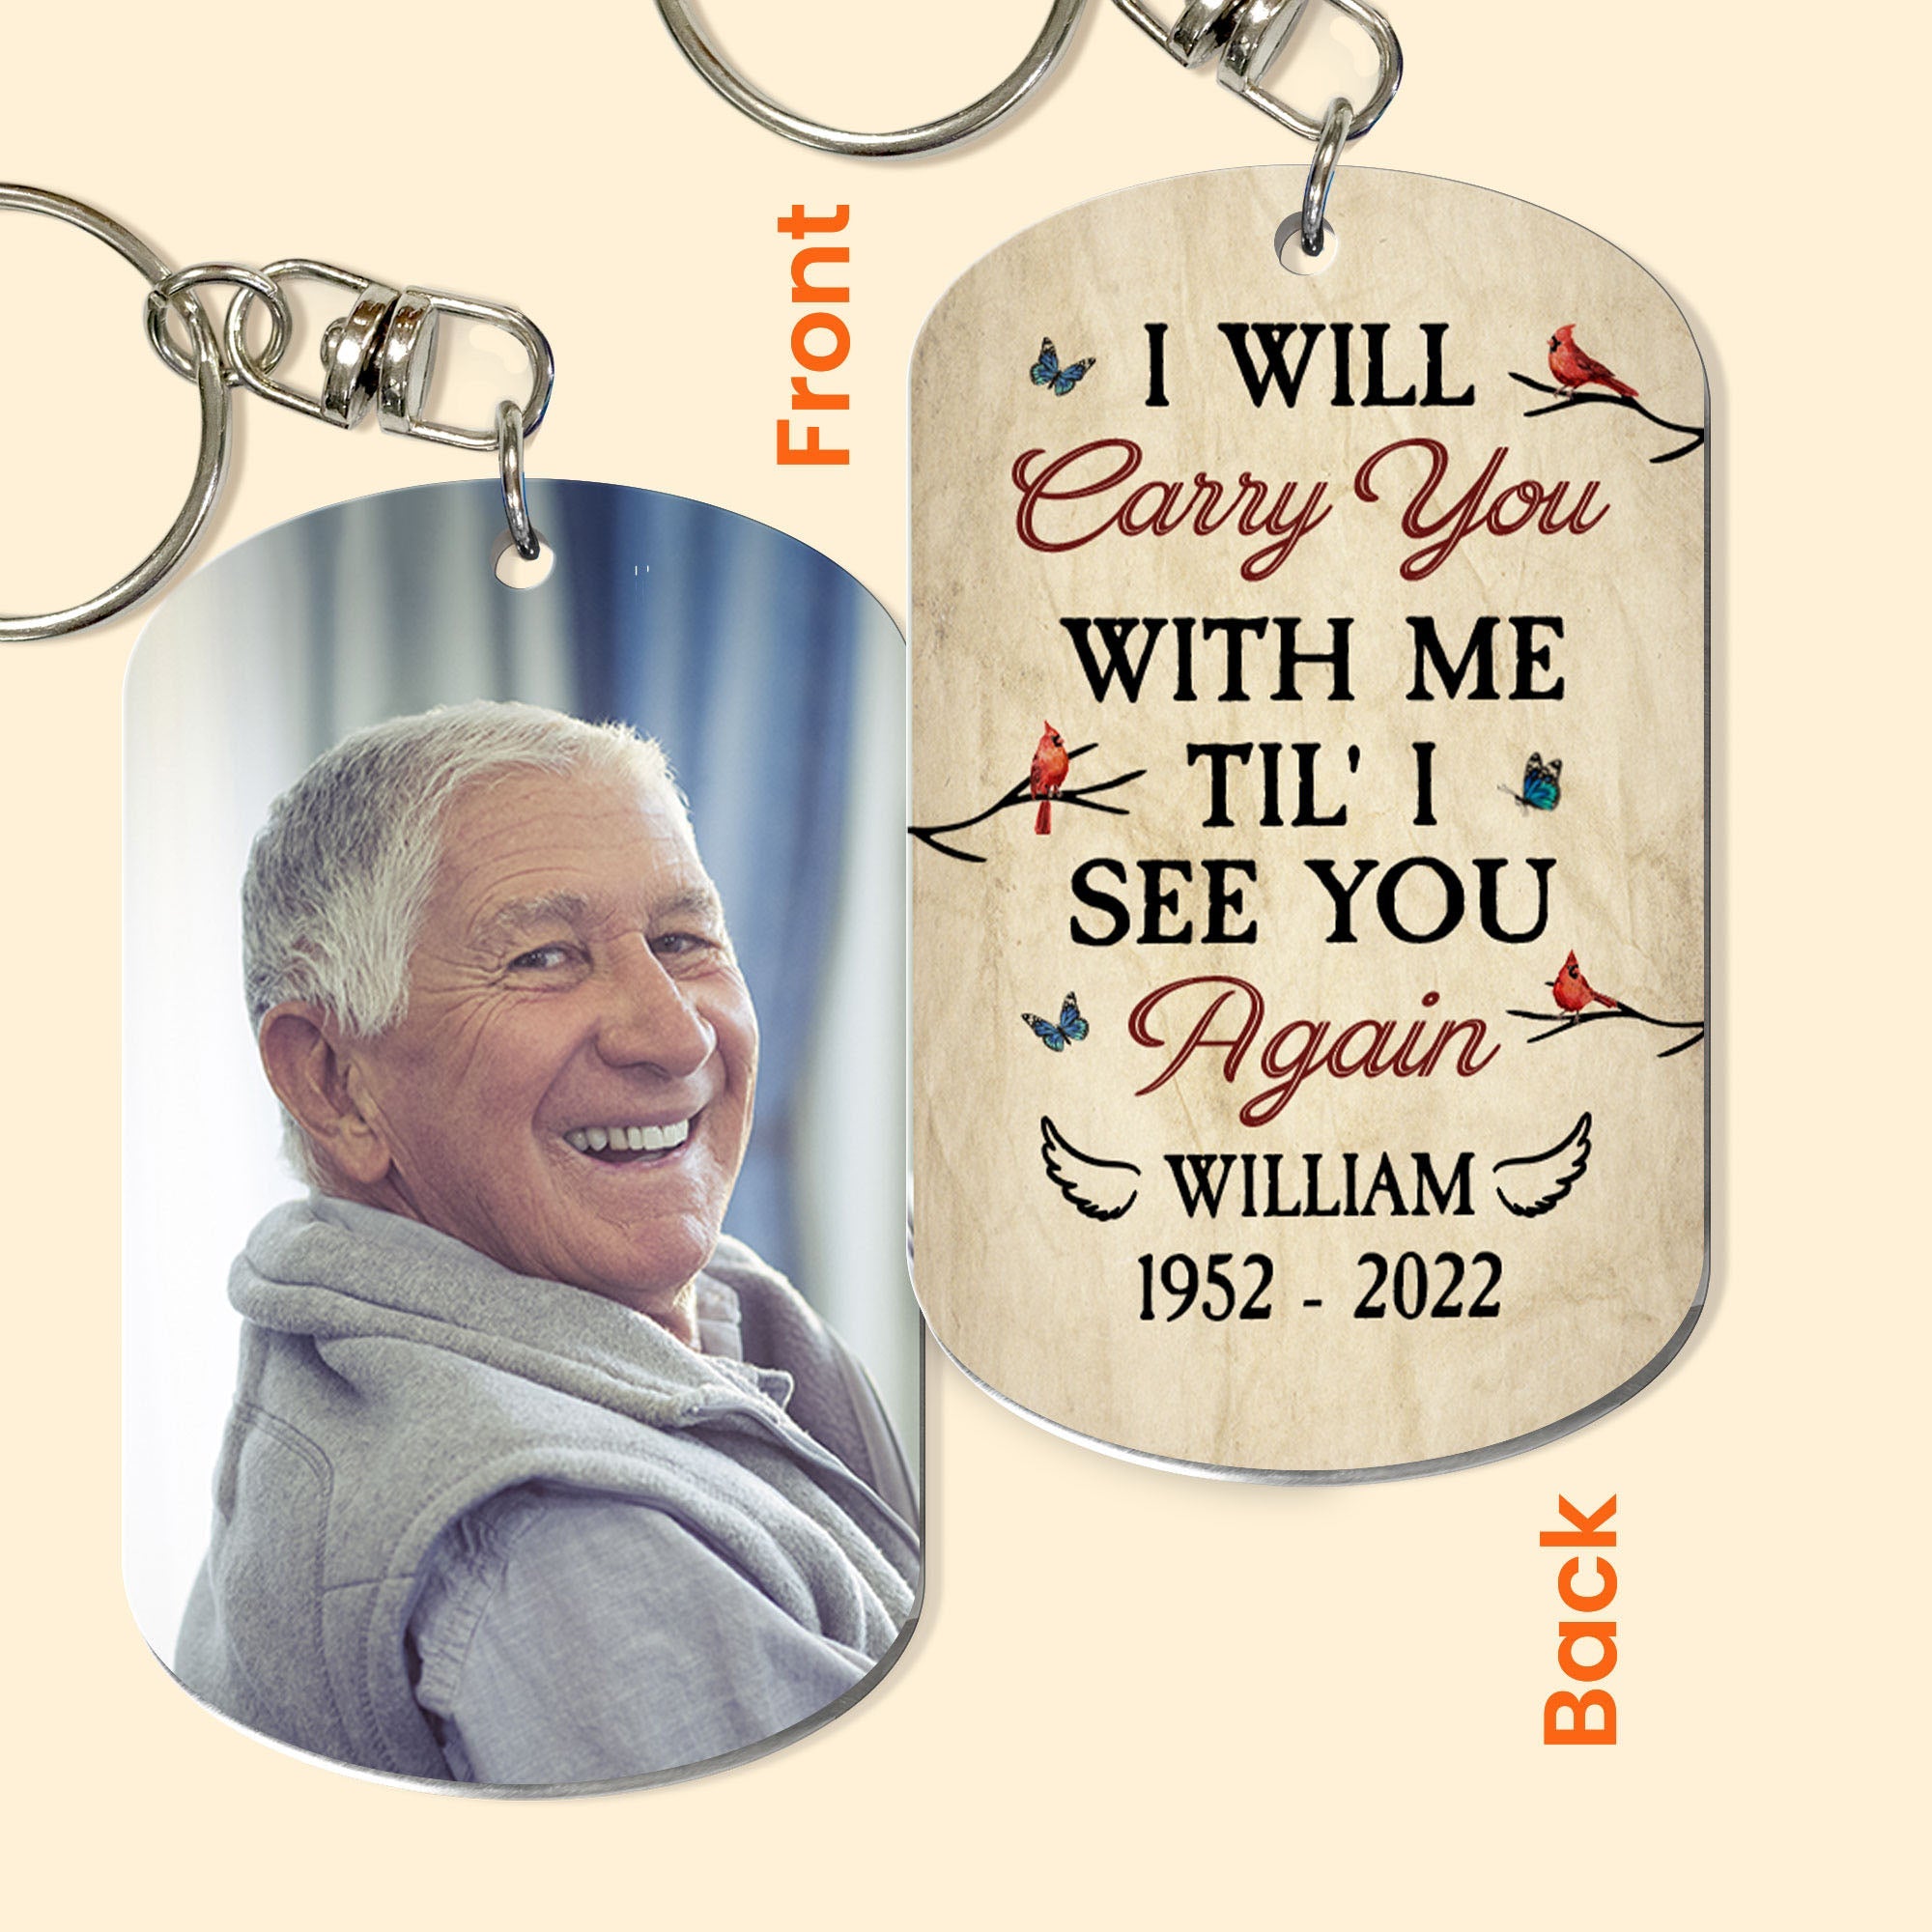 I Will Carry You With Me Til' I See You Again - Personalized Keychain - Birthday, Loving, Memorial, Anniversary Gift For Family With Lost Ones, Grief